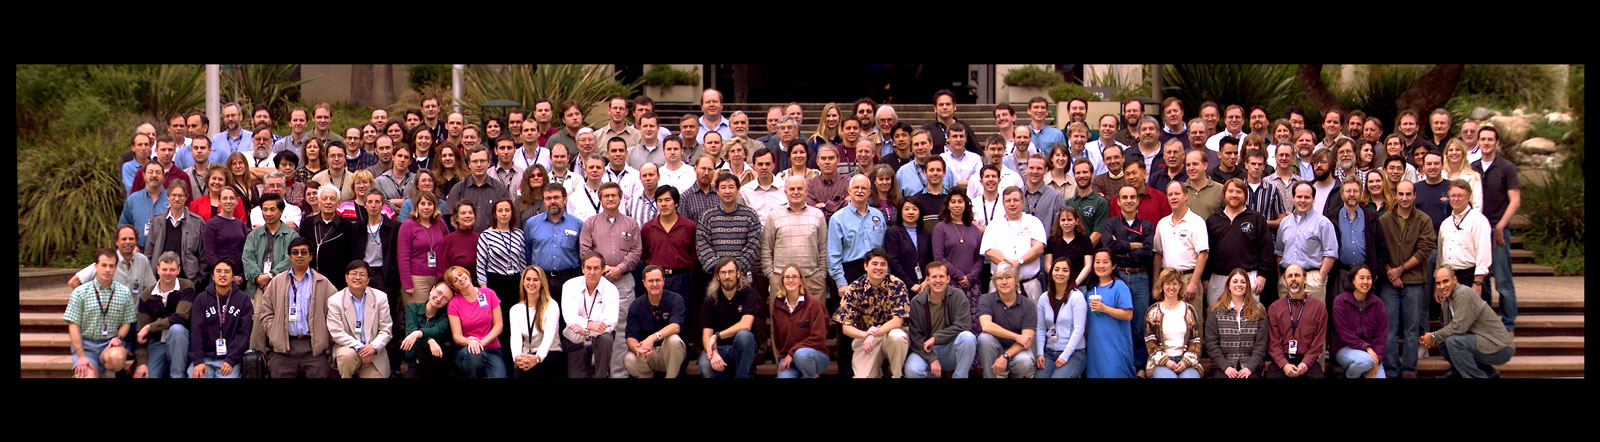 Scientists and engineers working on NASA’s Mars Exploration Rover mission gather for a team portrait during the rovers’ prime mission on Mars in 2004 at NASA’s Jet Propulsion Laboratory in Pasadena, California.